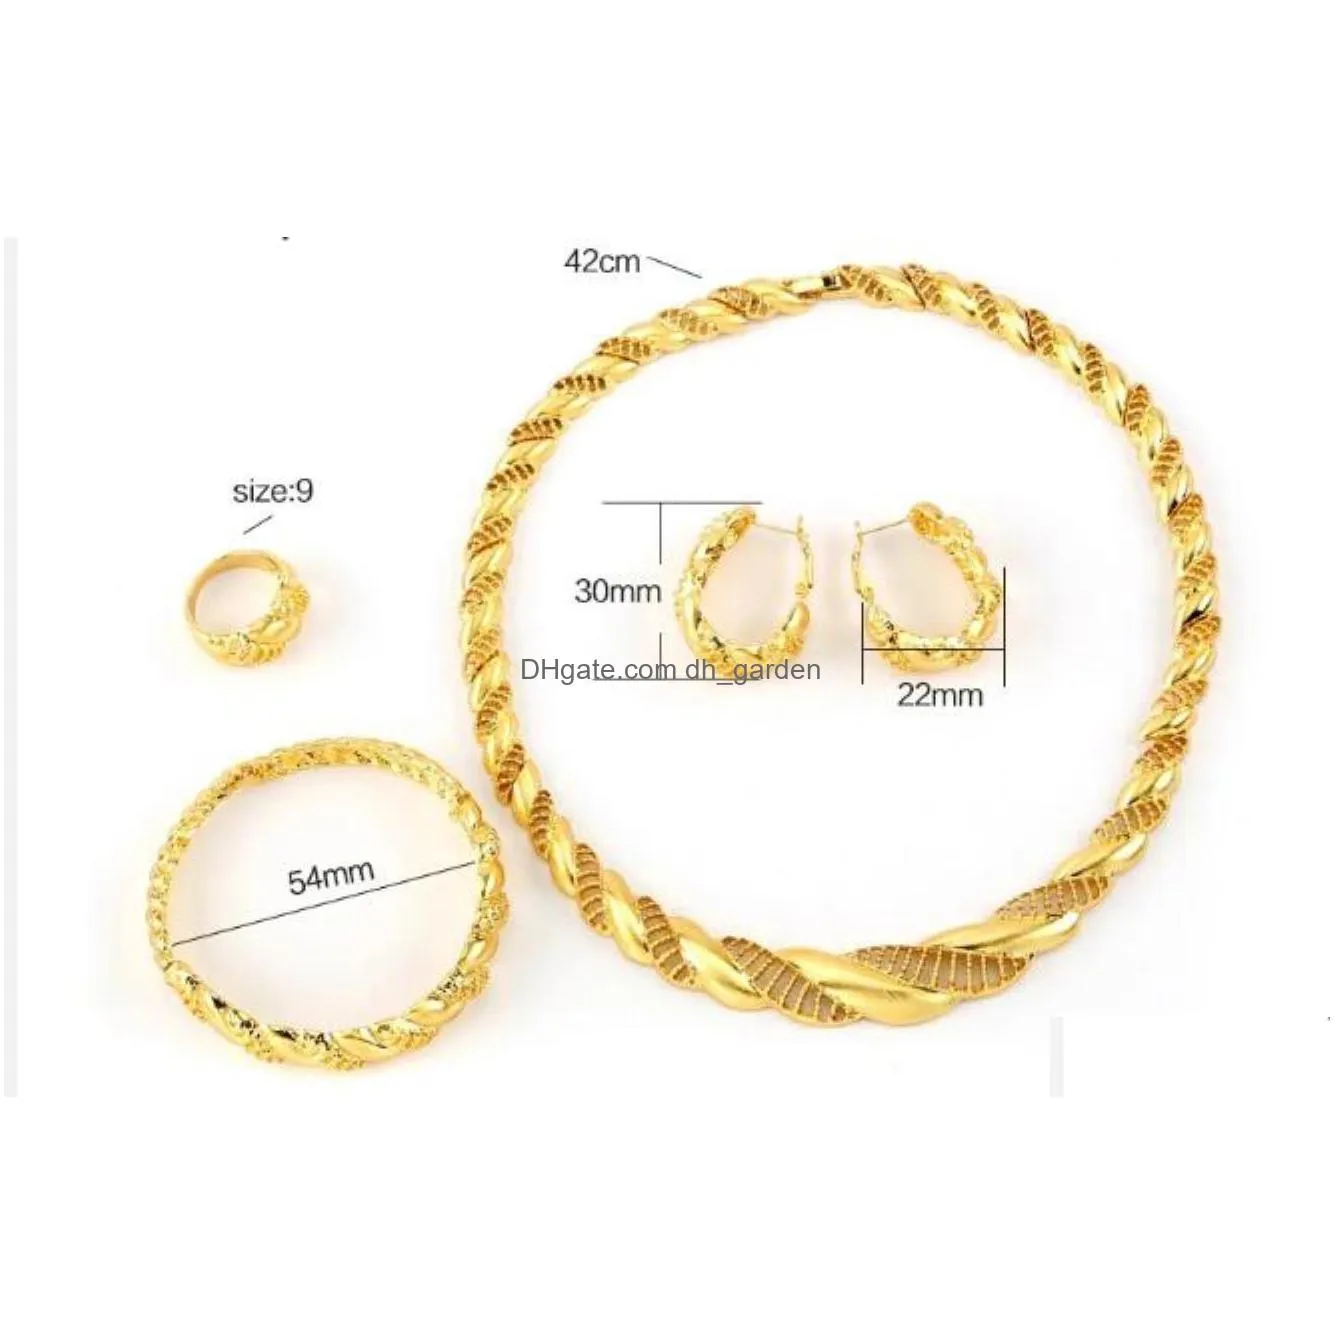 earrings necklace jewelry sets mejewelry est brazil gold plated set high quality wedding banquet dating fhk12177 drop delivery 2021